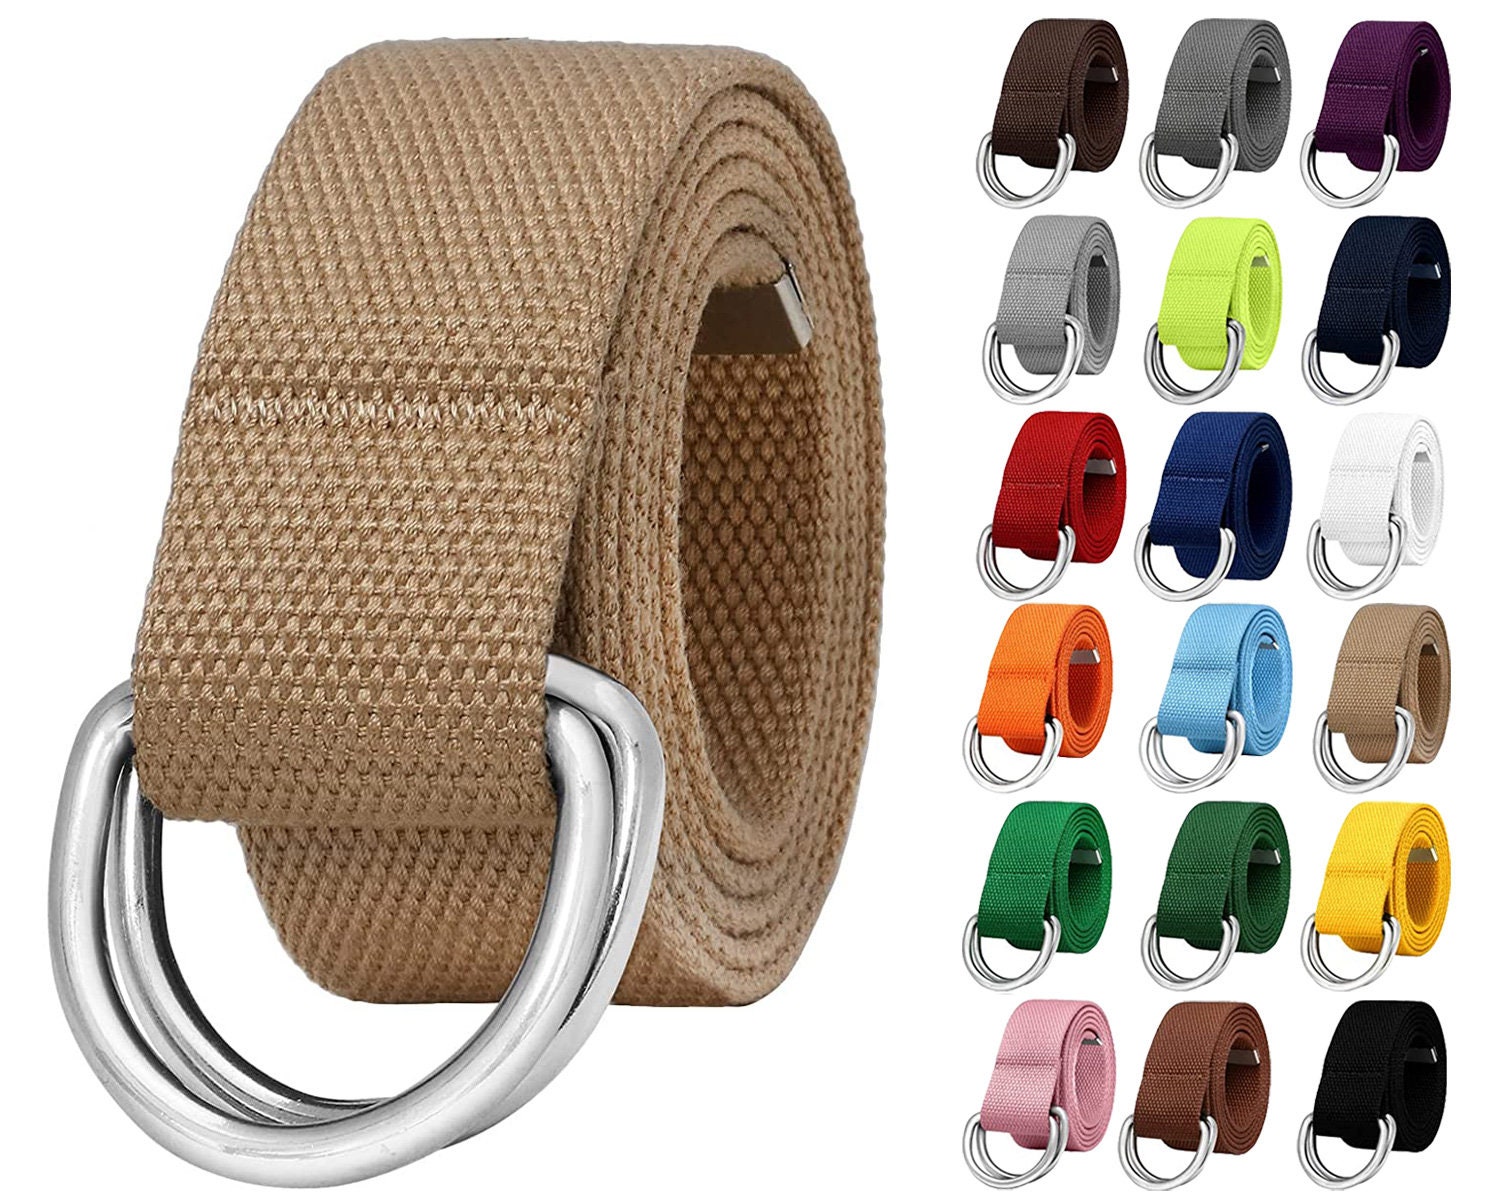 Metal Rotary Buckle Reversible Belt For Men Tight Nylon Male Canvas  Tactical Belts Military Training Army High Quality Waistband